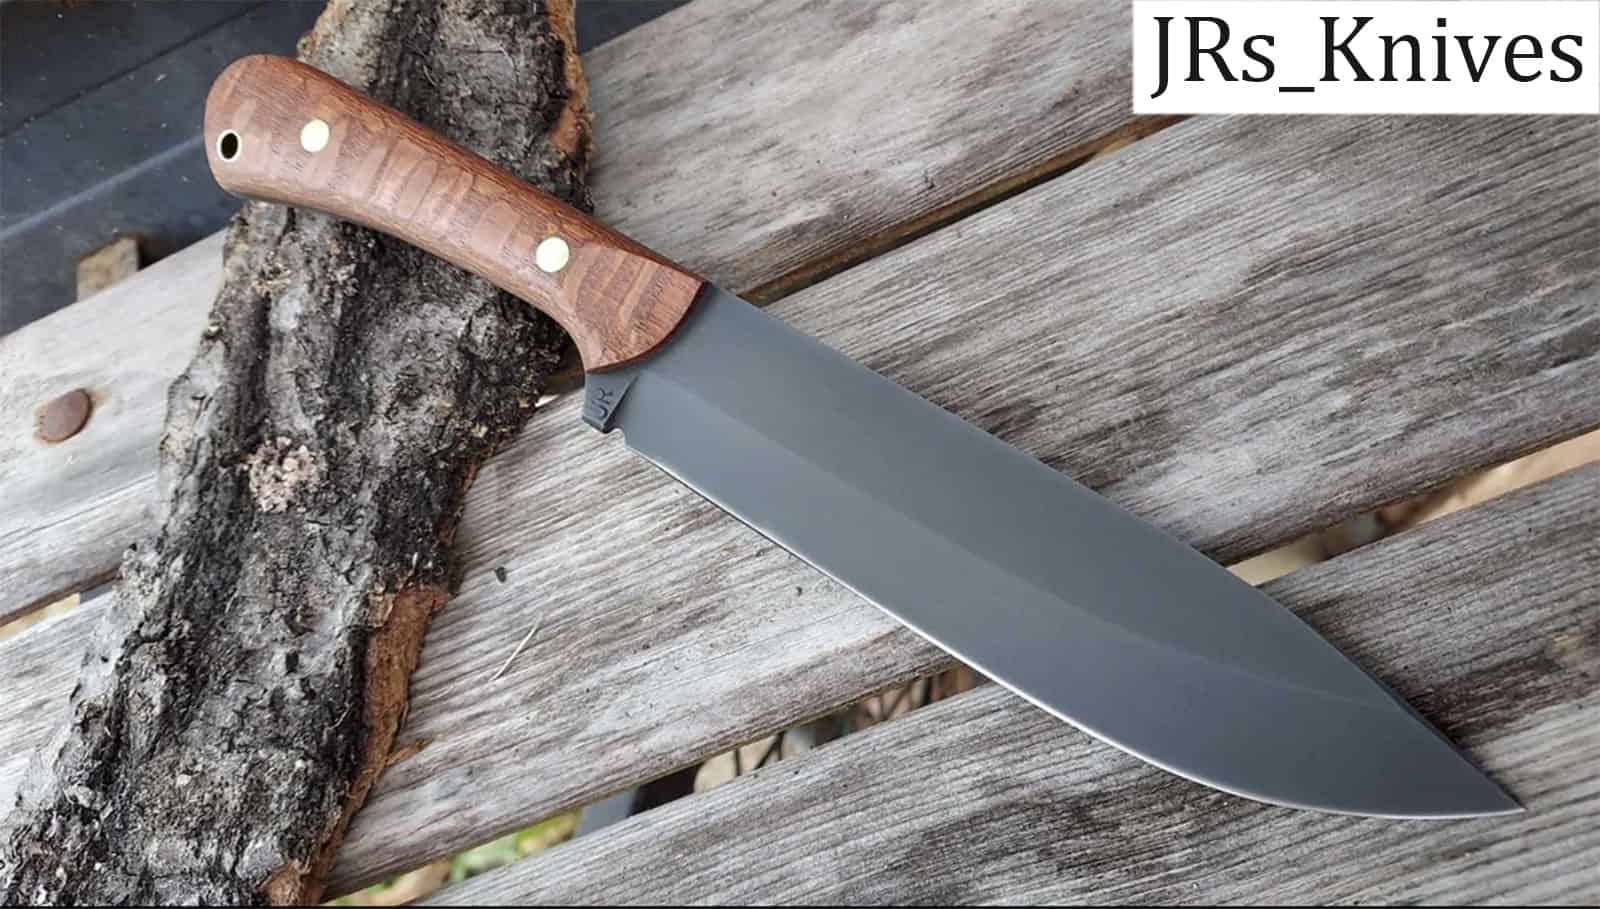 JRs knives are all made in Missouri.